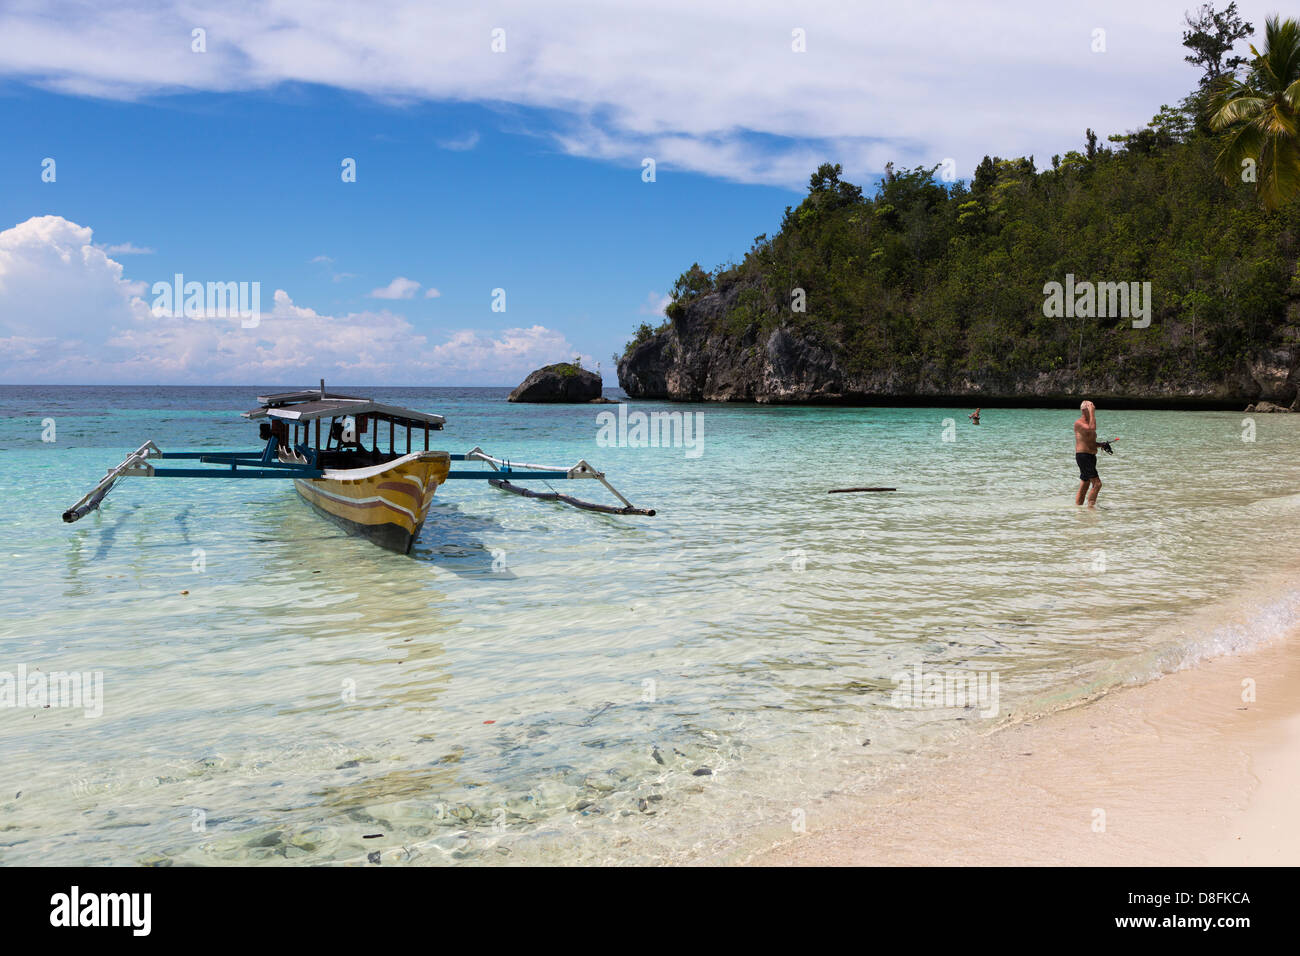 A tourist on an isolated beach in the Togians island in Sulawesi, Indonesia Stock Photo